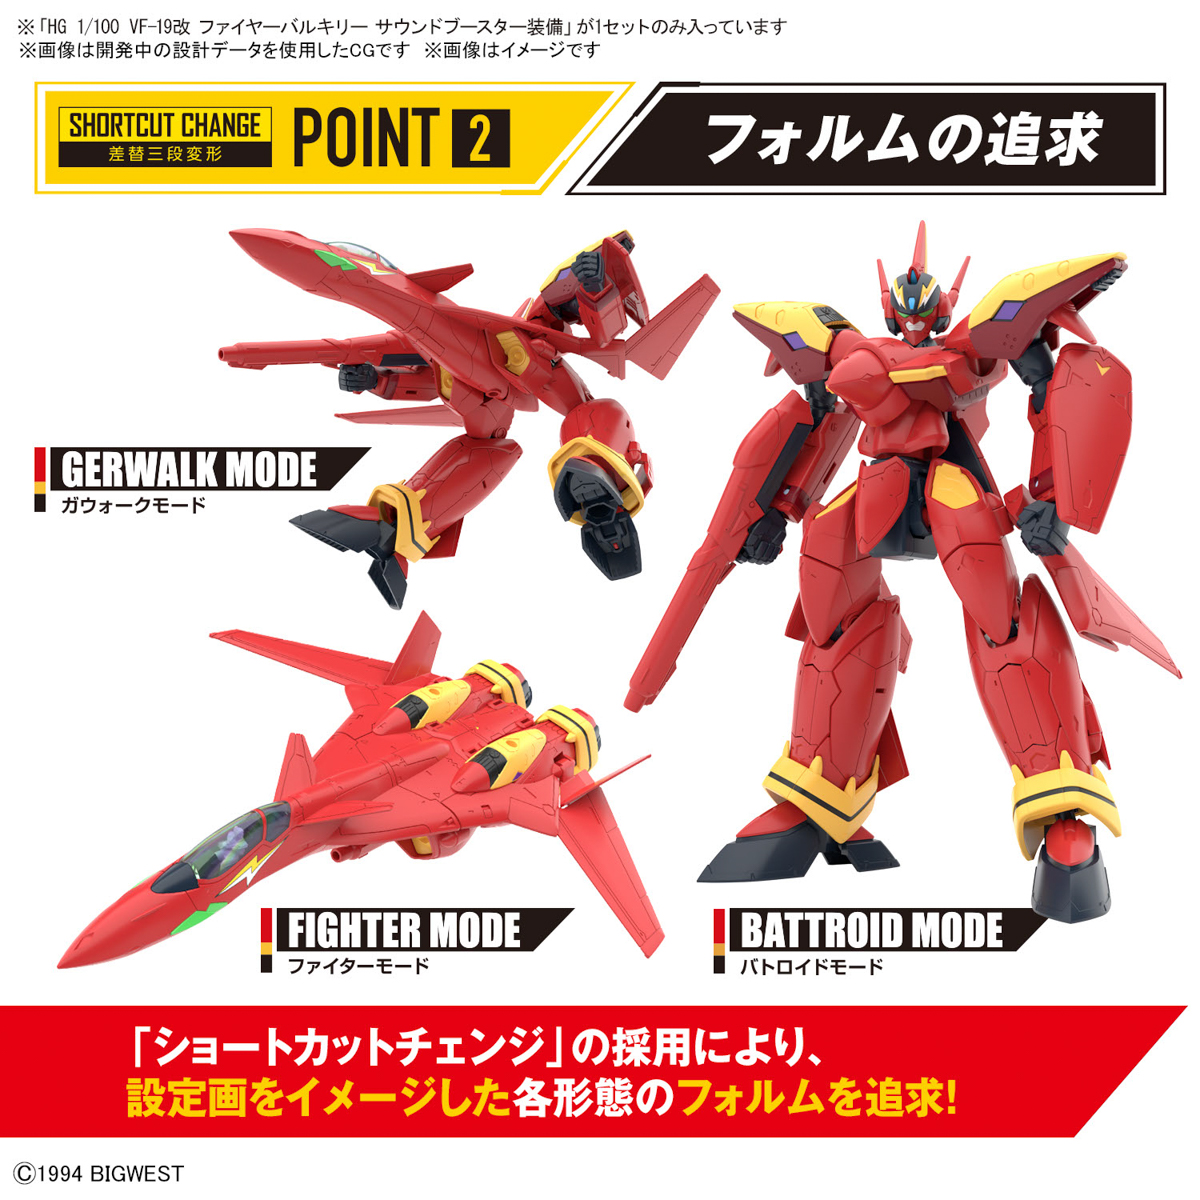 MACROSS 7:  HG 1/100 VF-19 EXCALIBUR CUSTOM (FIRE VALKYRIE) WITH SOUND BOOSTER - 07